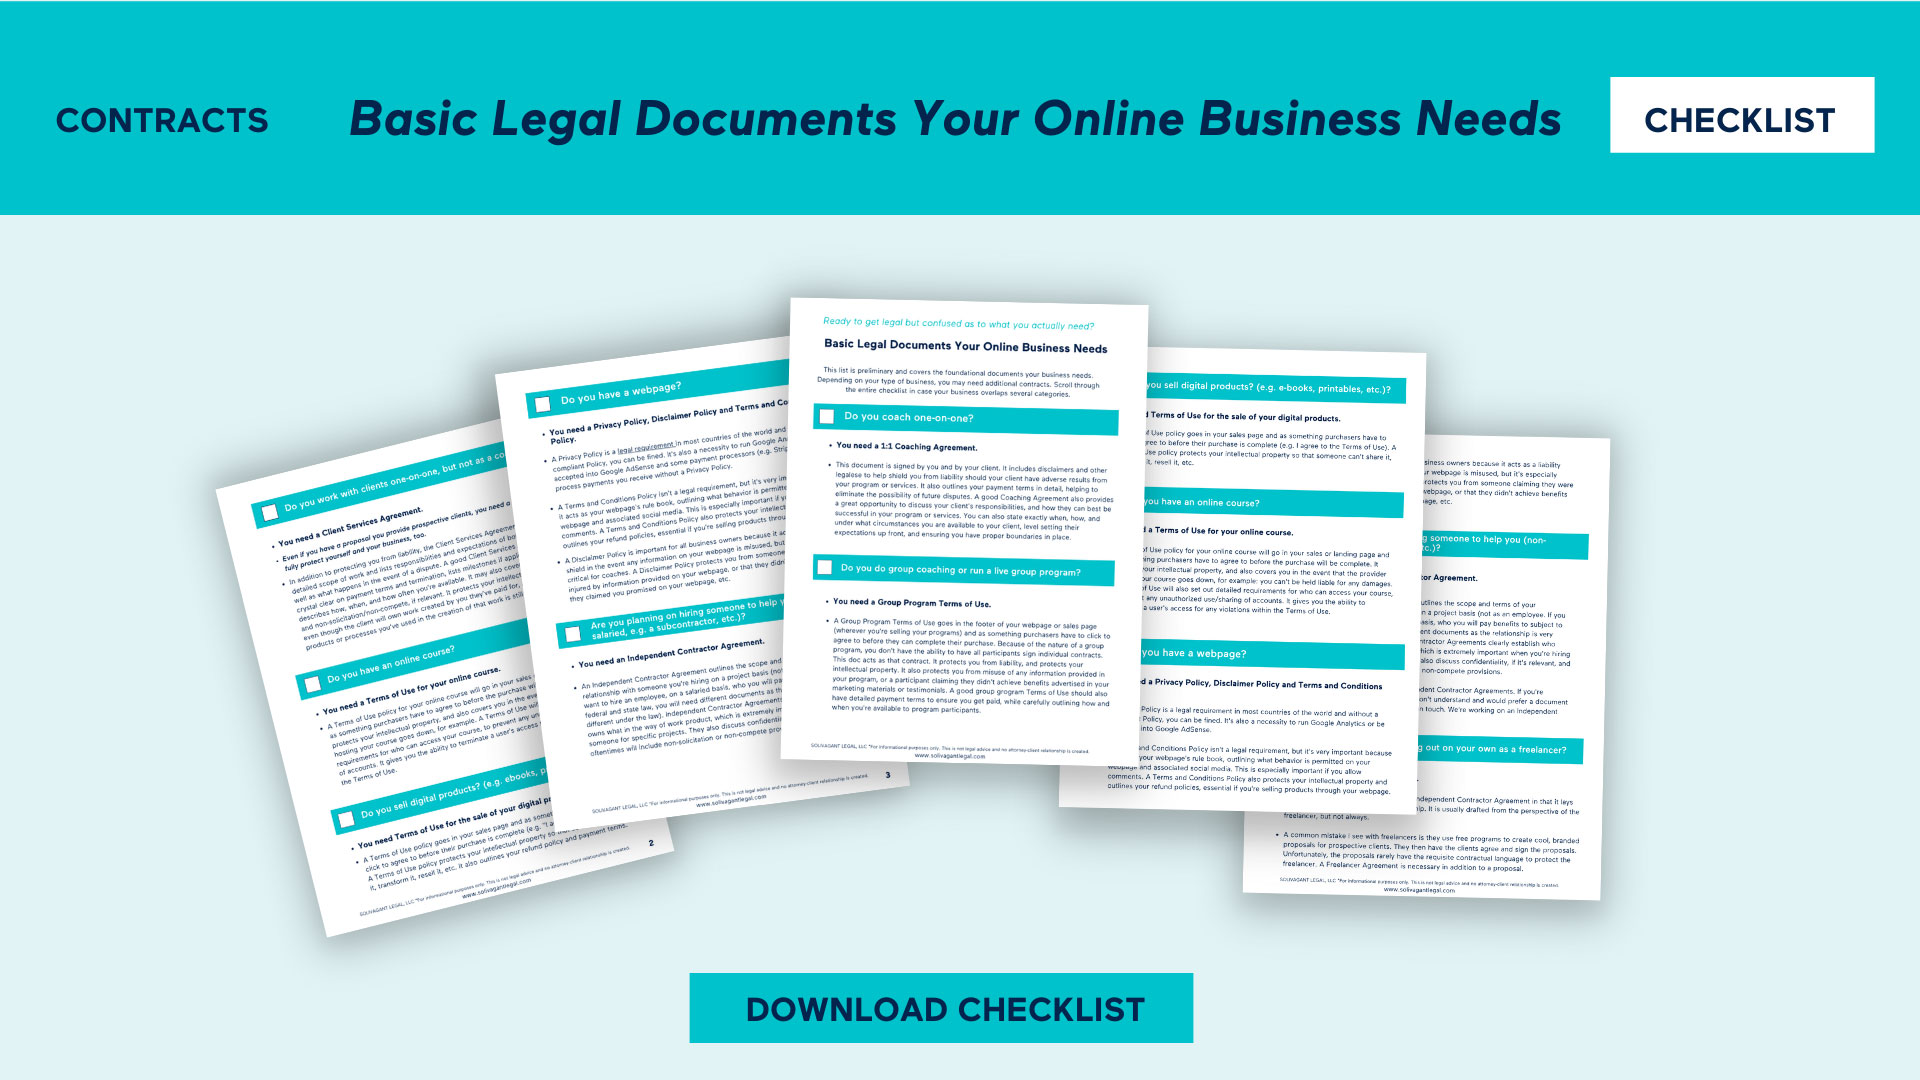 Basic Documents Every Online Business Needs Checklist: